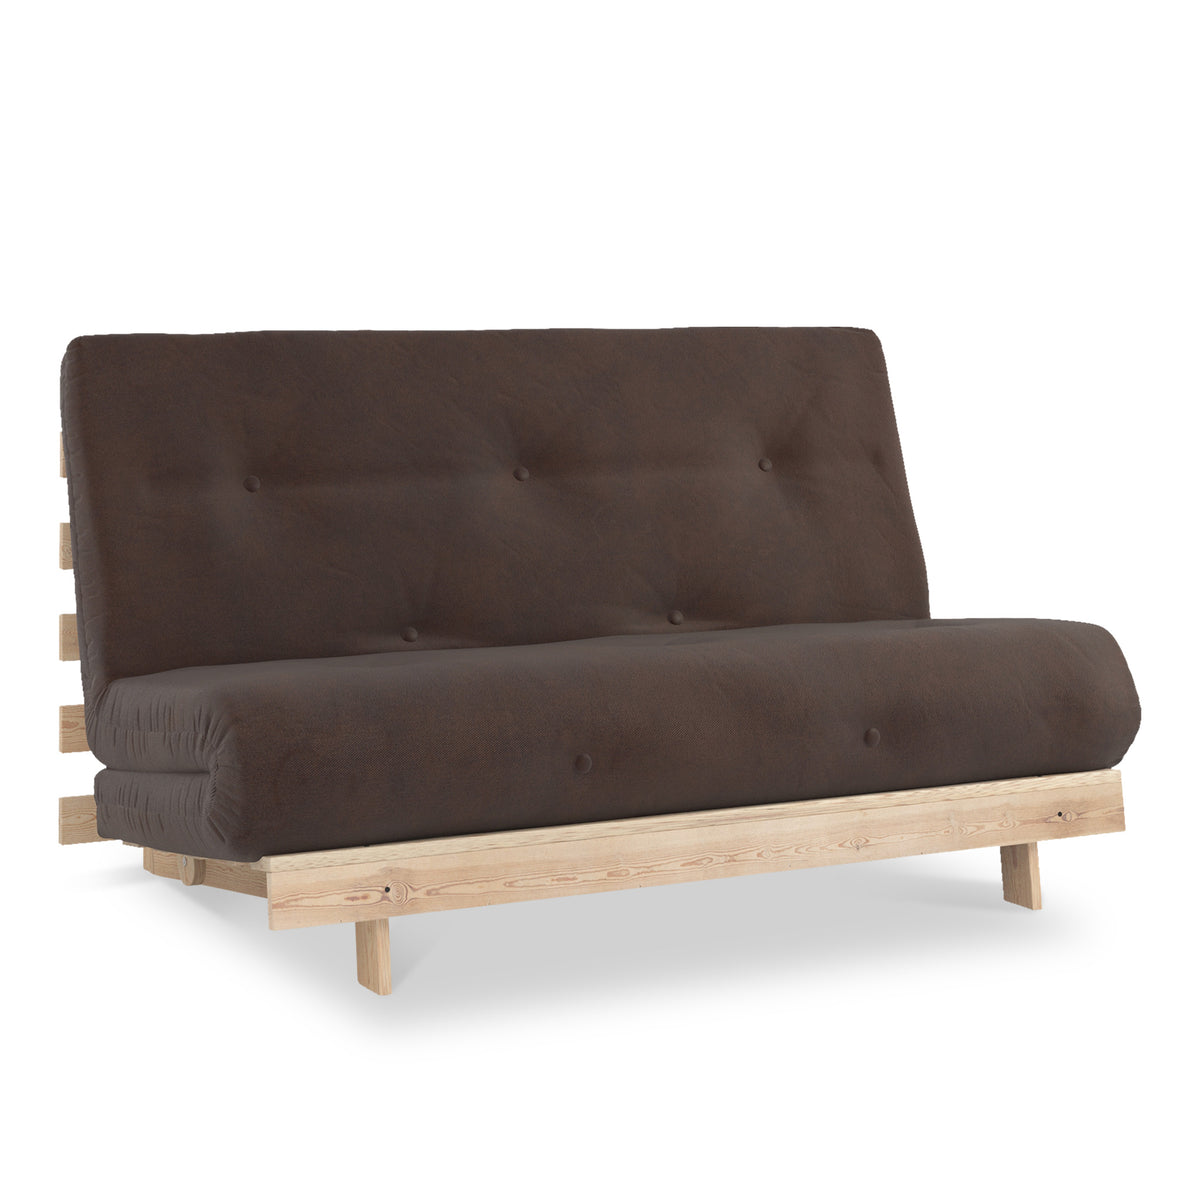 Maggie Chocolate Double Futon Sofa Bed from Roseland Furniture